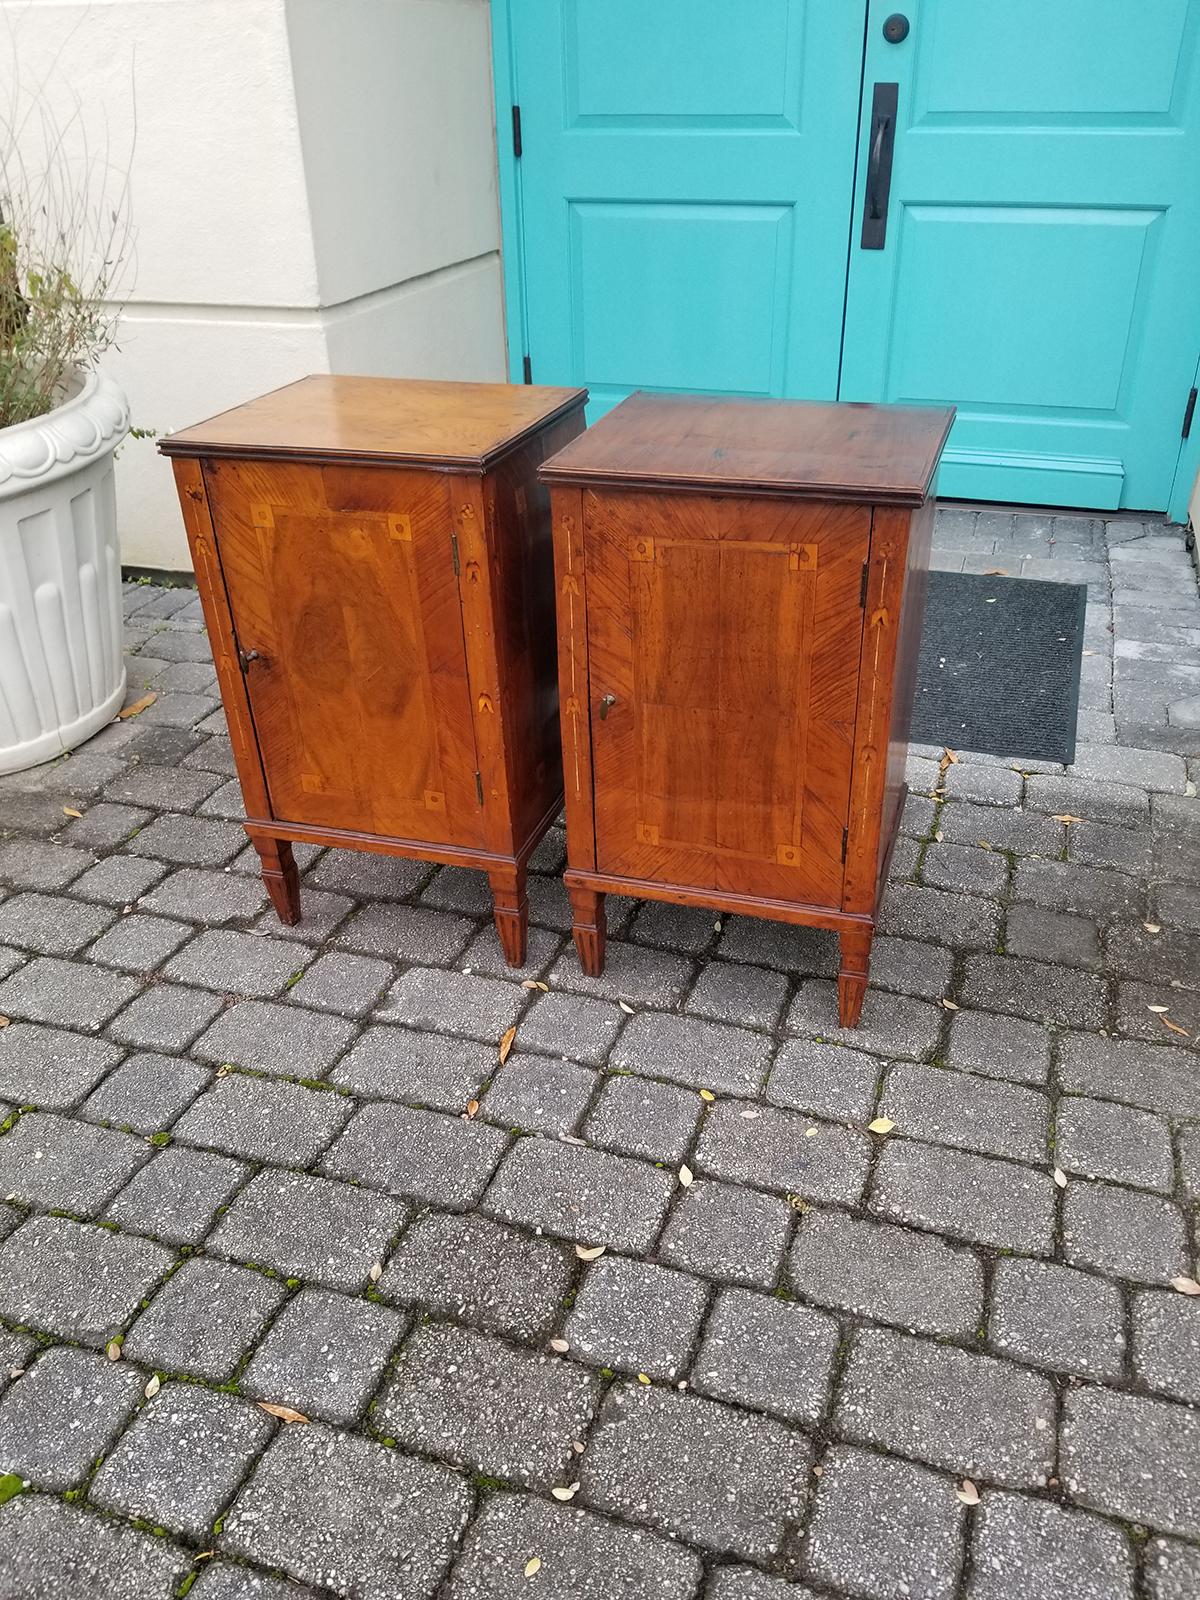 Pair of Early 19th Century inlaid Italian cabinets, c.1810.